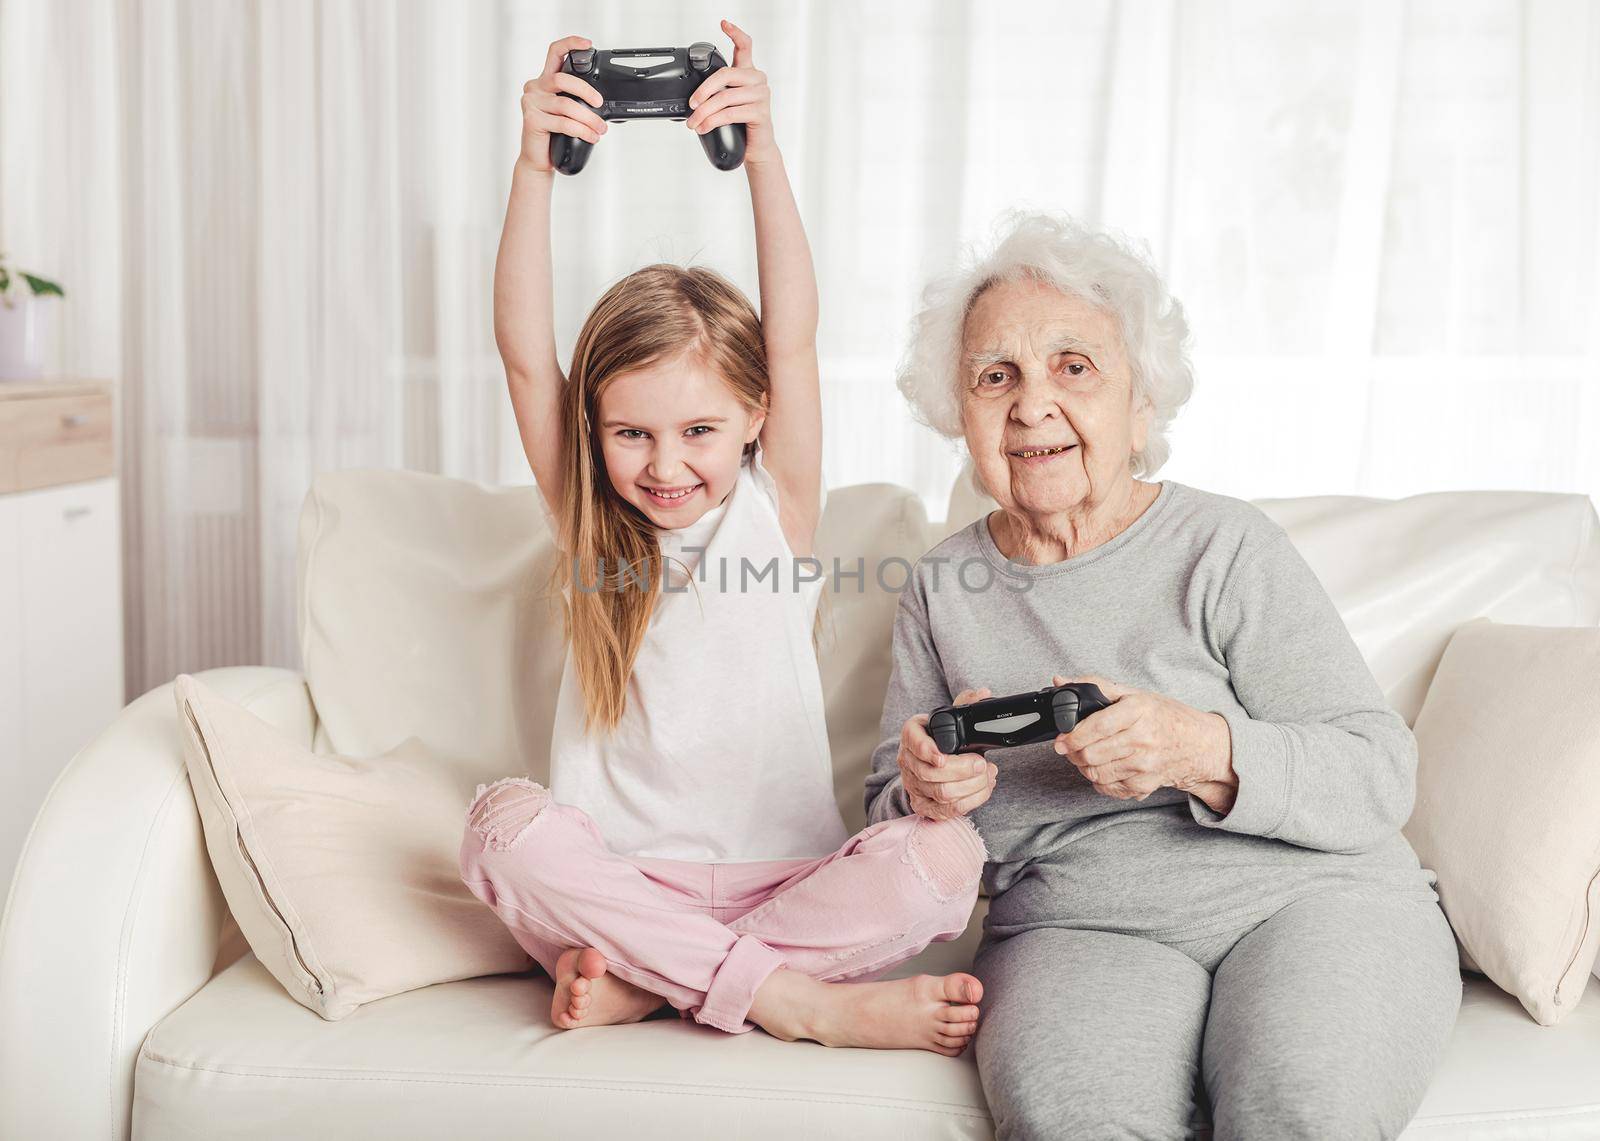 Grandmother with granddaughter playing games by tan4ikk1